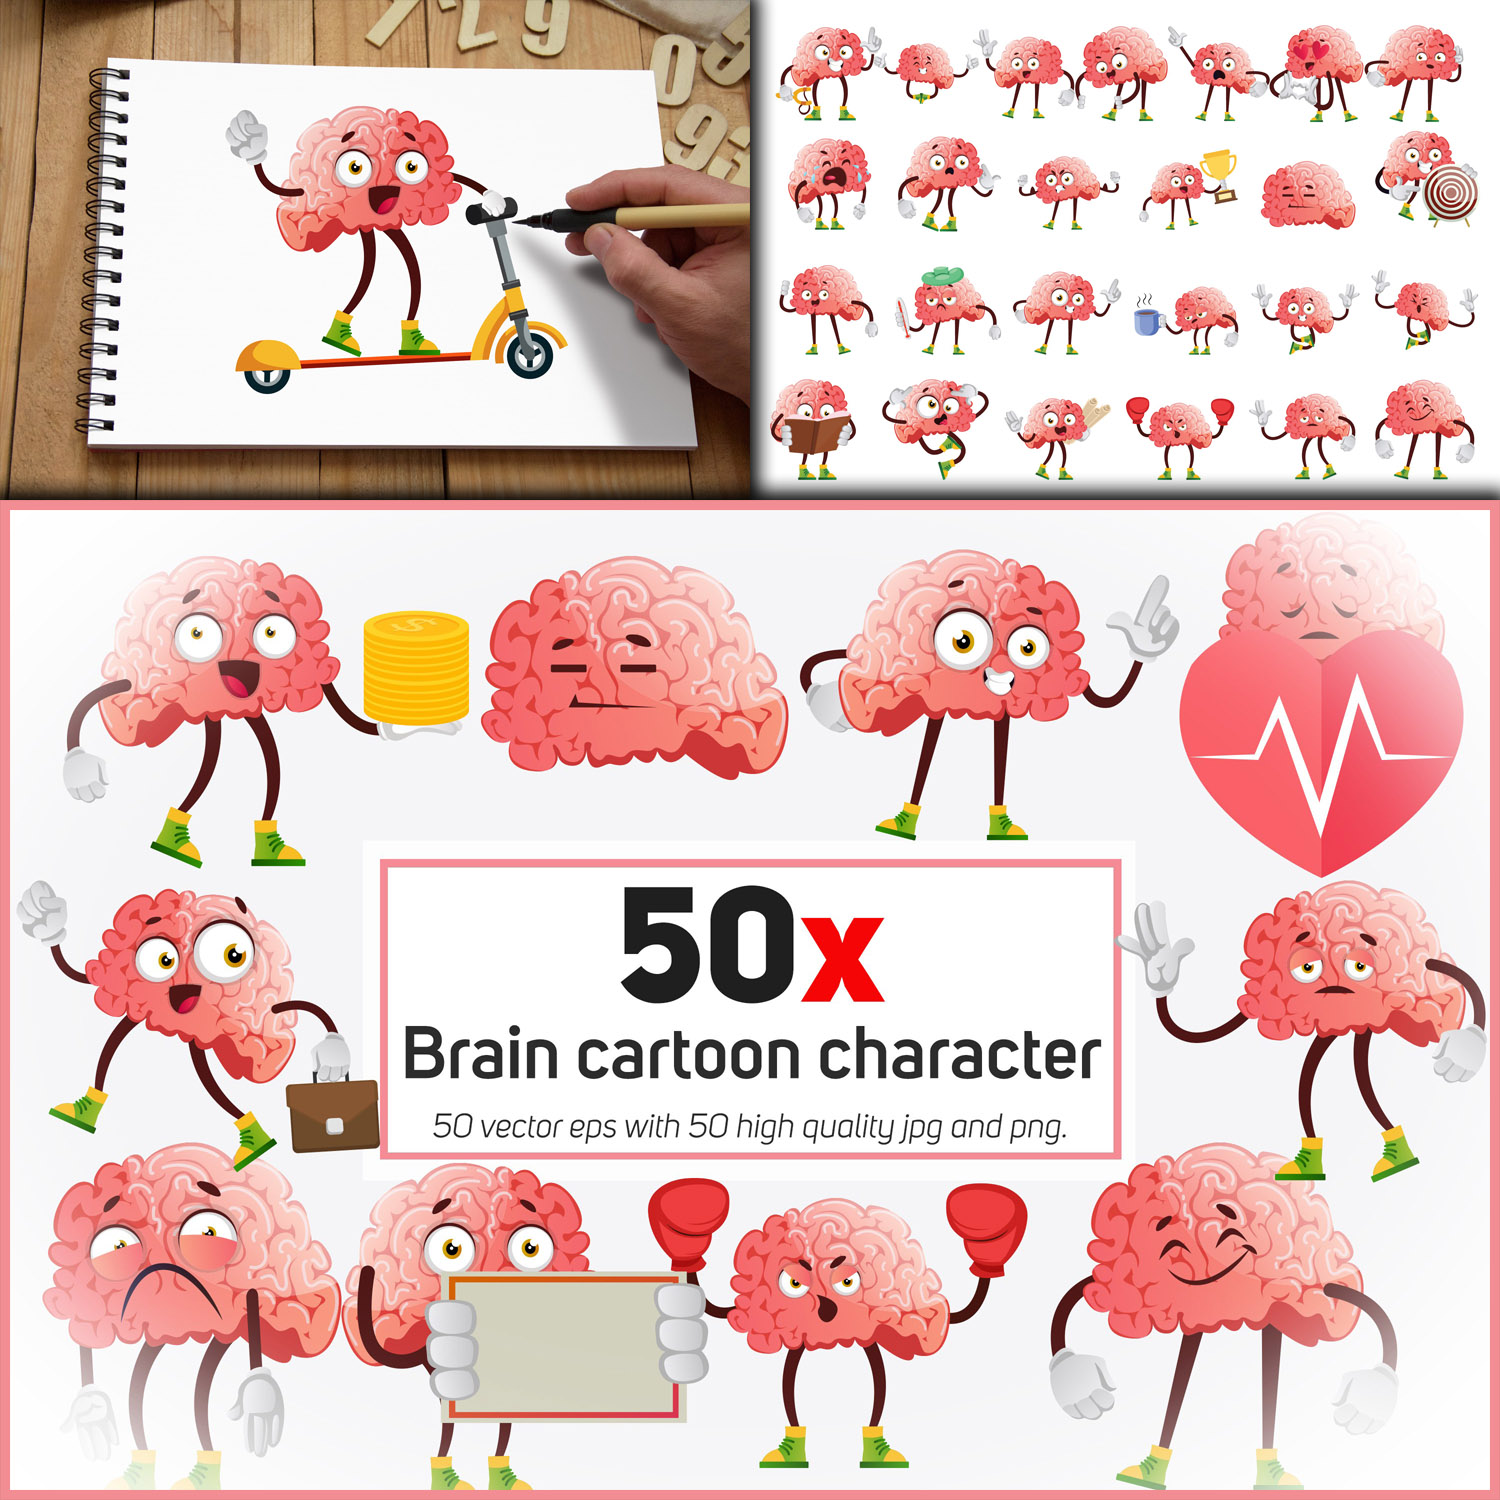 Preview brain cartoon character collection illustratio.